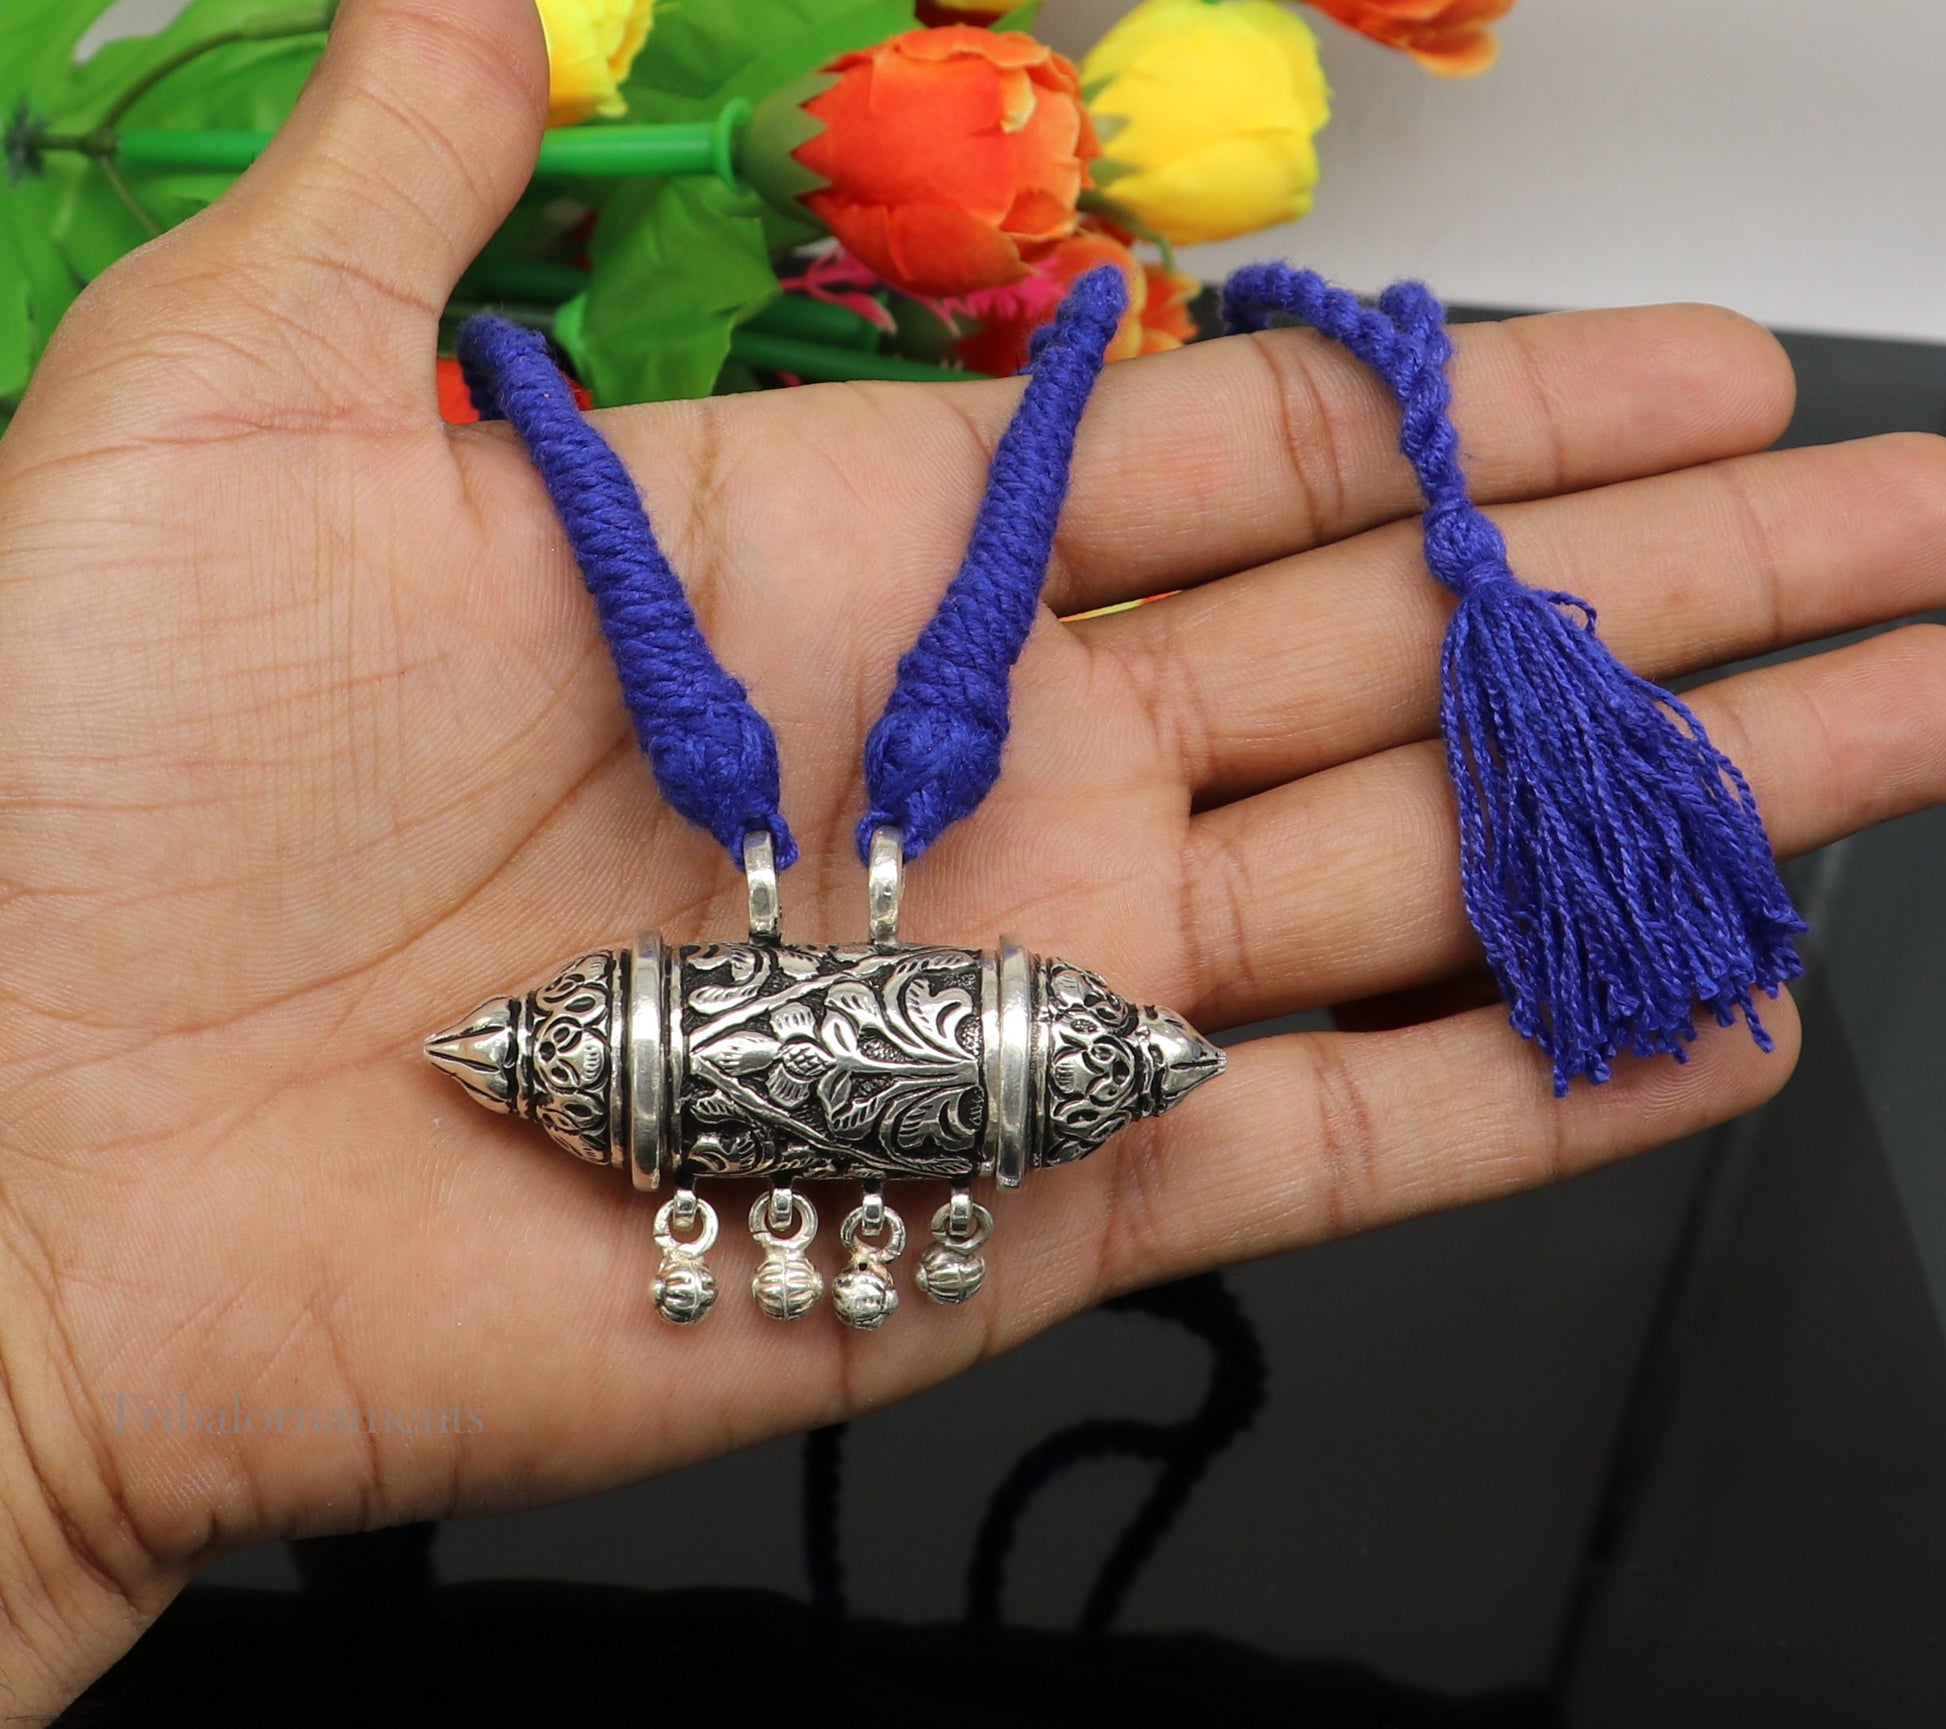 925 Sterling silver handmade vintage antique design pendant amulet with hangings bells excellent tribal jewelry from Rajasthan india nec274 - TRIBAL ORNAMENTS